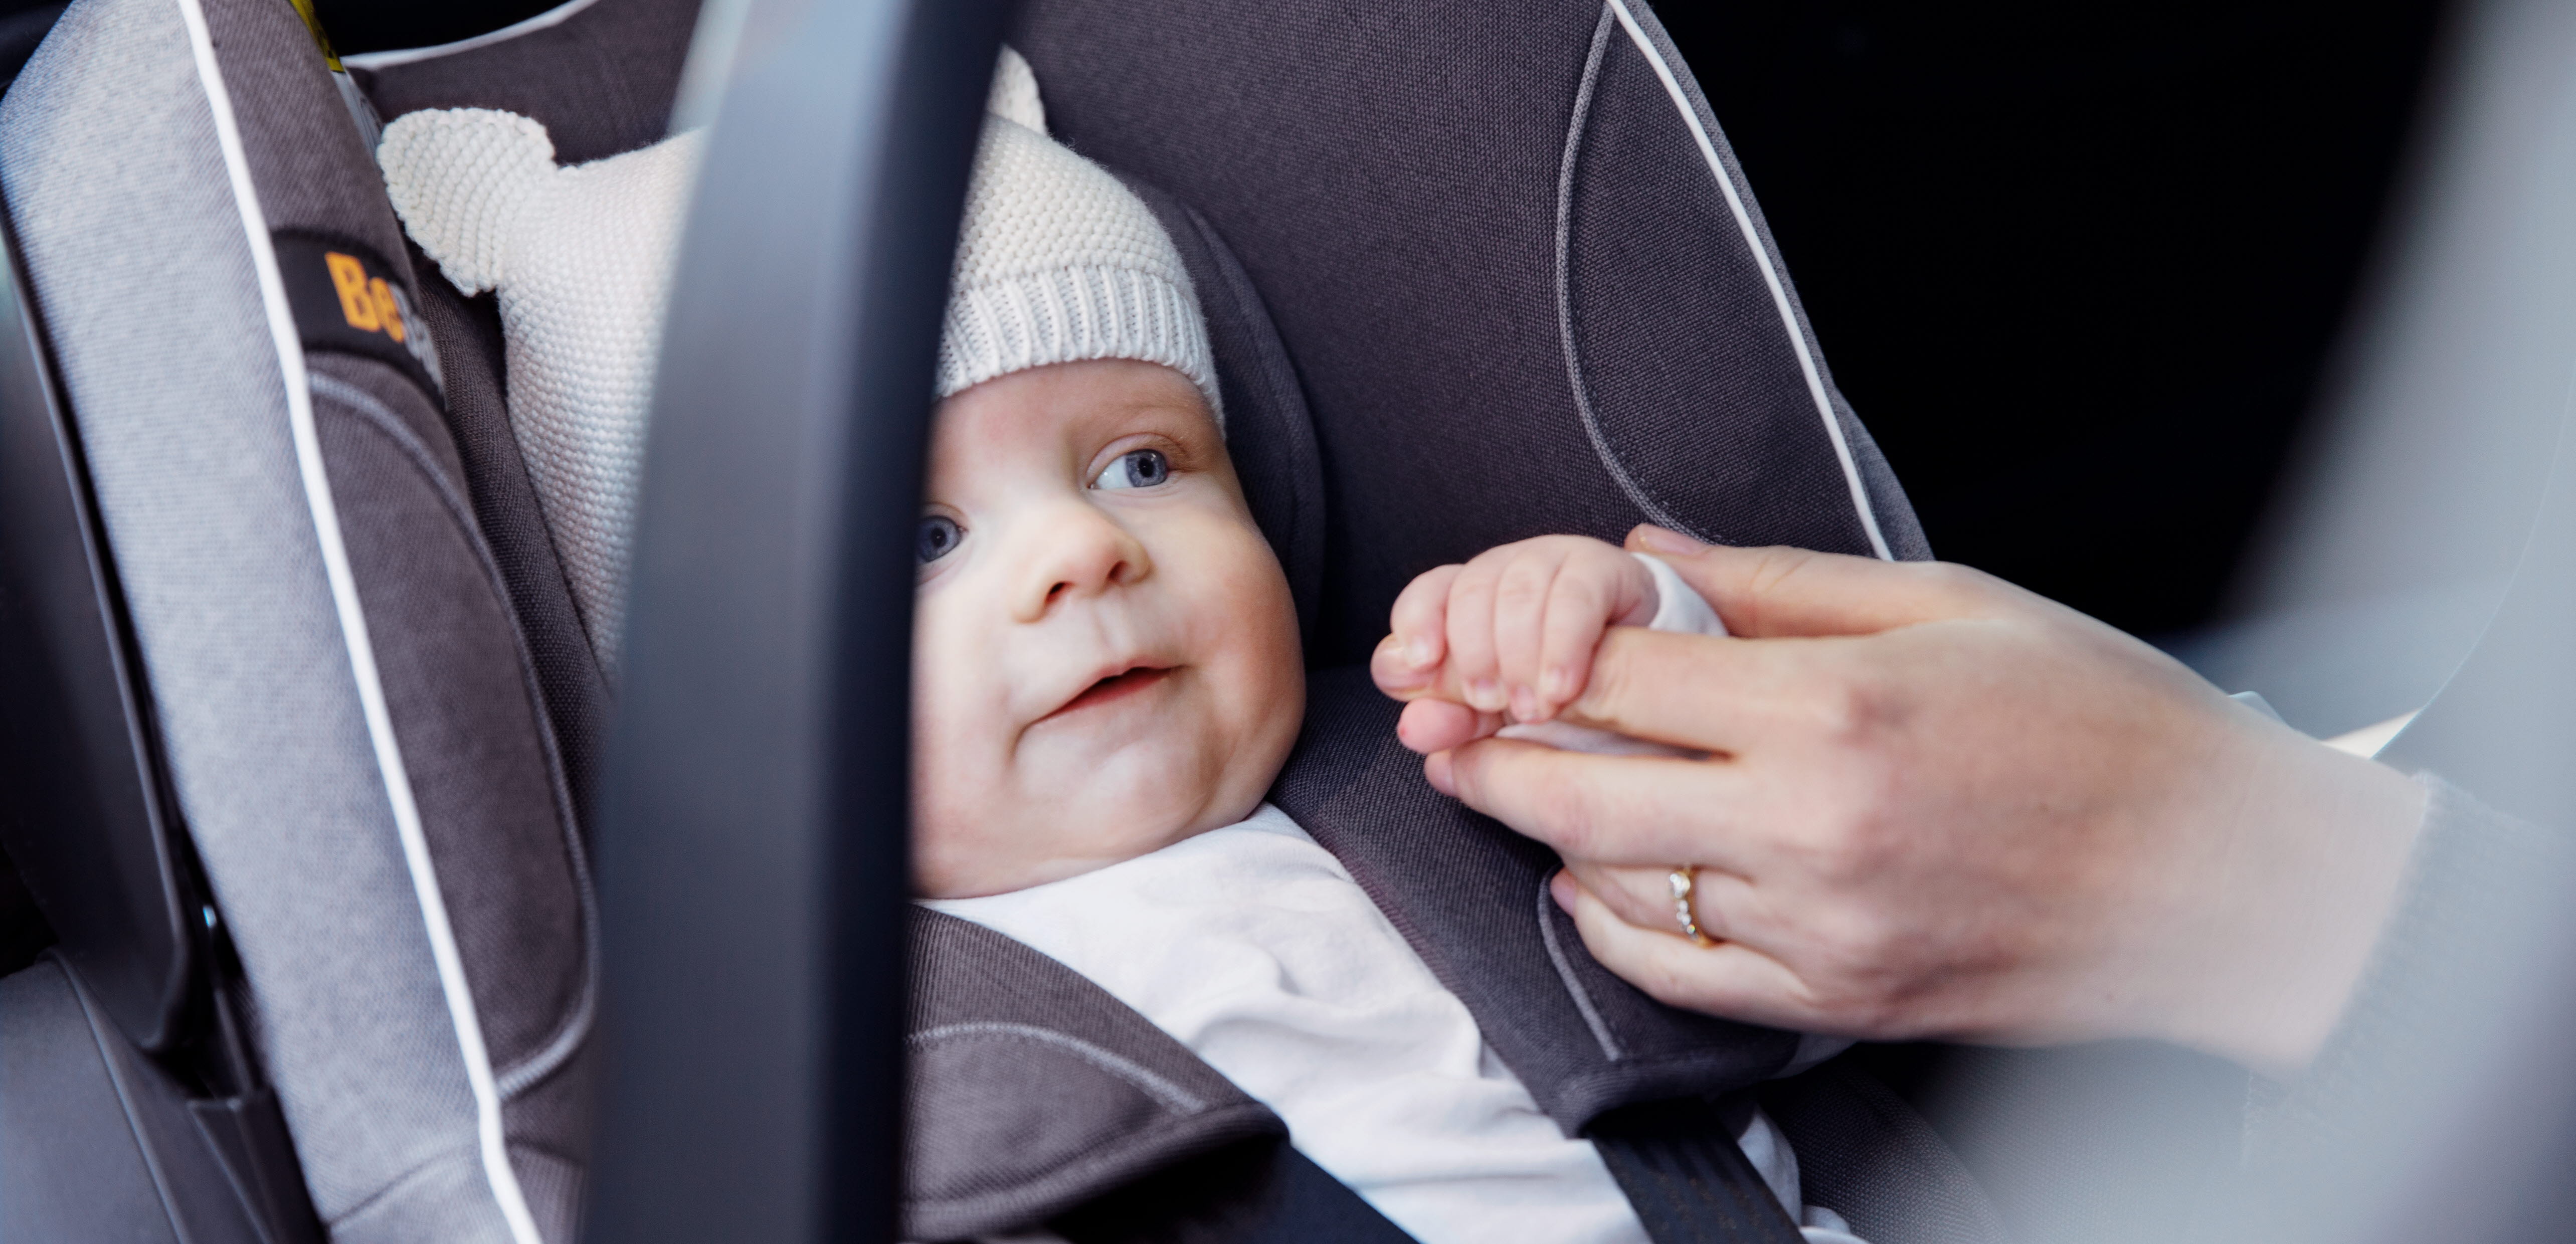 How tight should your car seat be? 